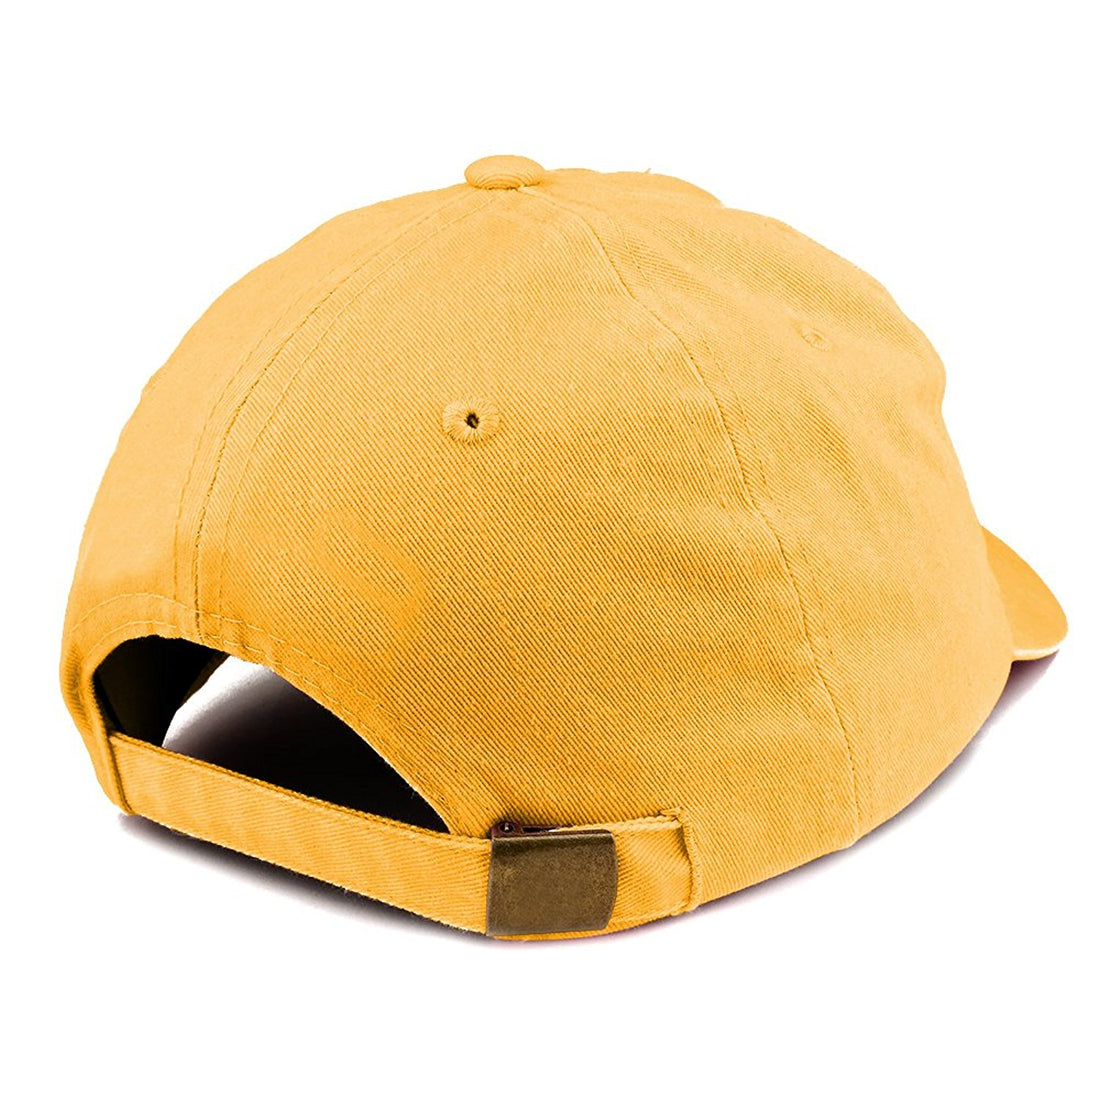 Trendy Apparel Shop Established 1971 Embroidered 48th Birthday Gift Pigment Dyed Washed Cotton Cap